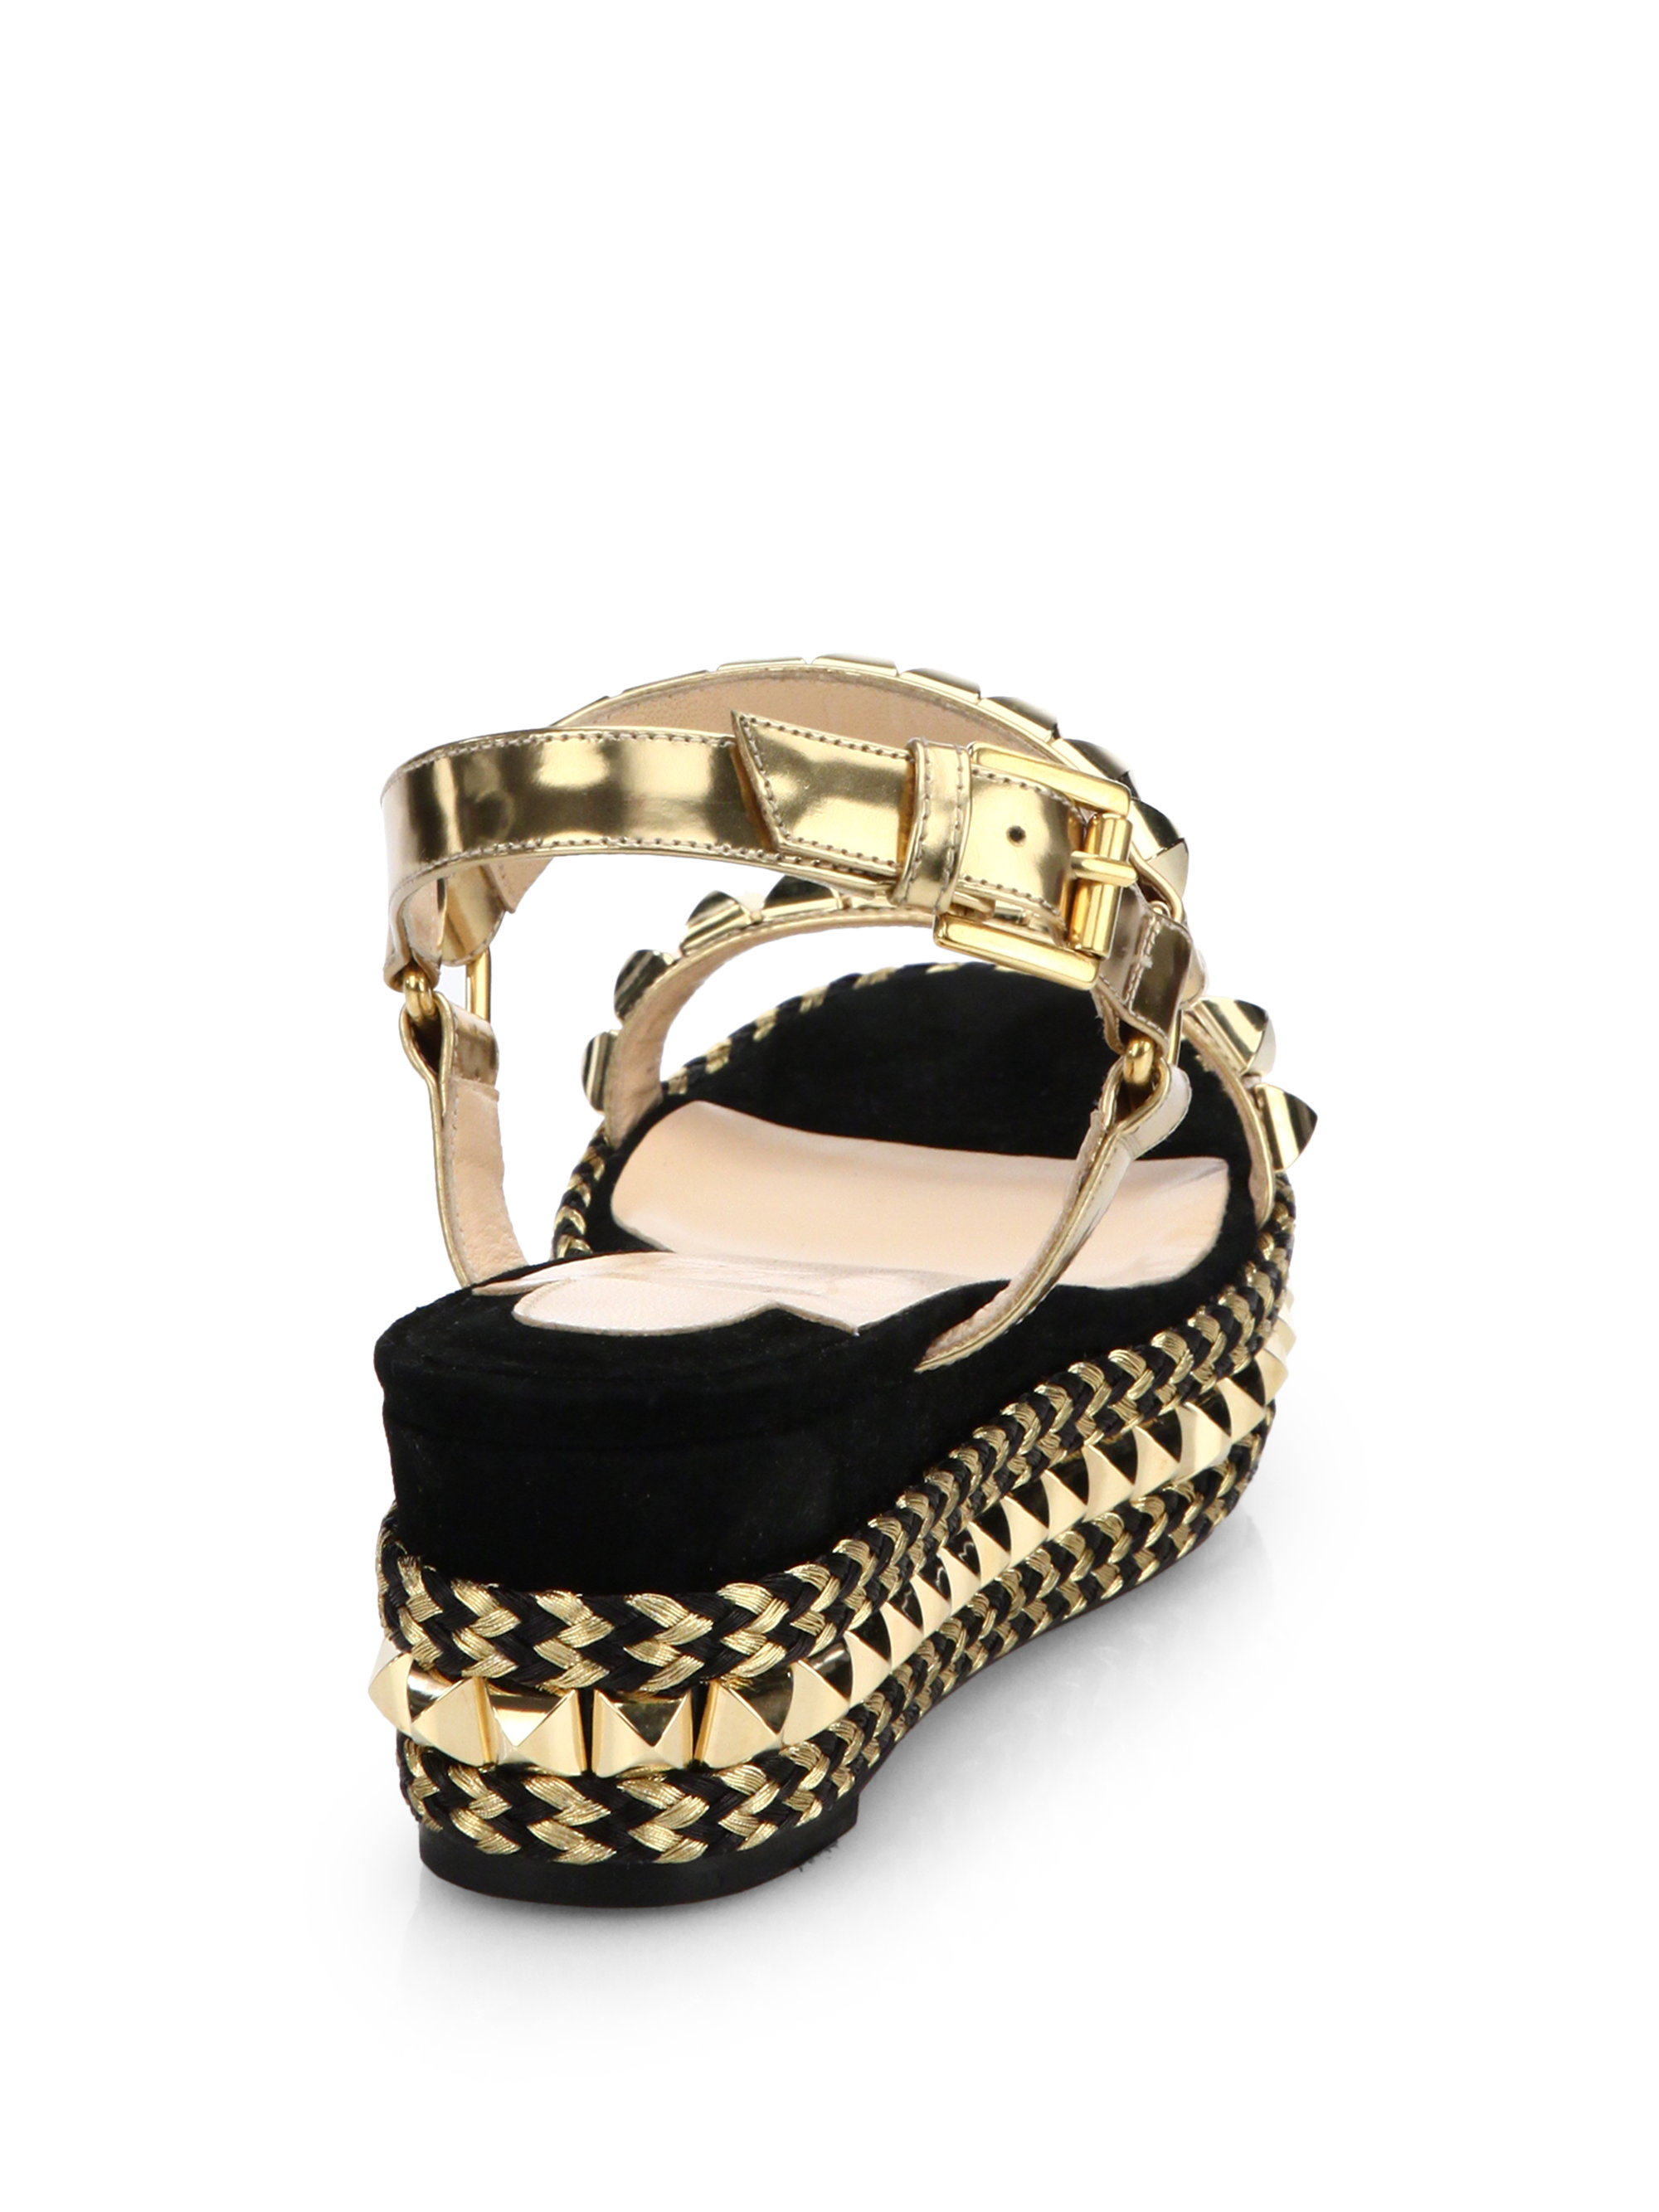 Christian louboutin Cataclou Patent Leather Espadrilles in Gold ...  